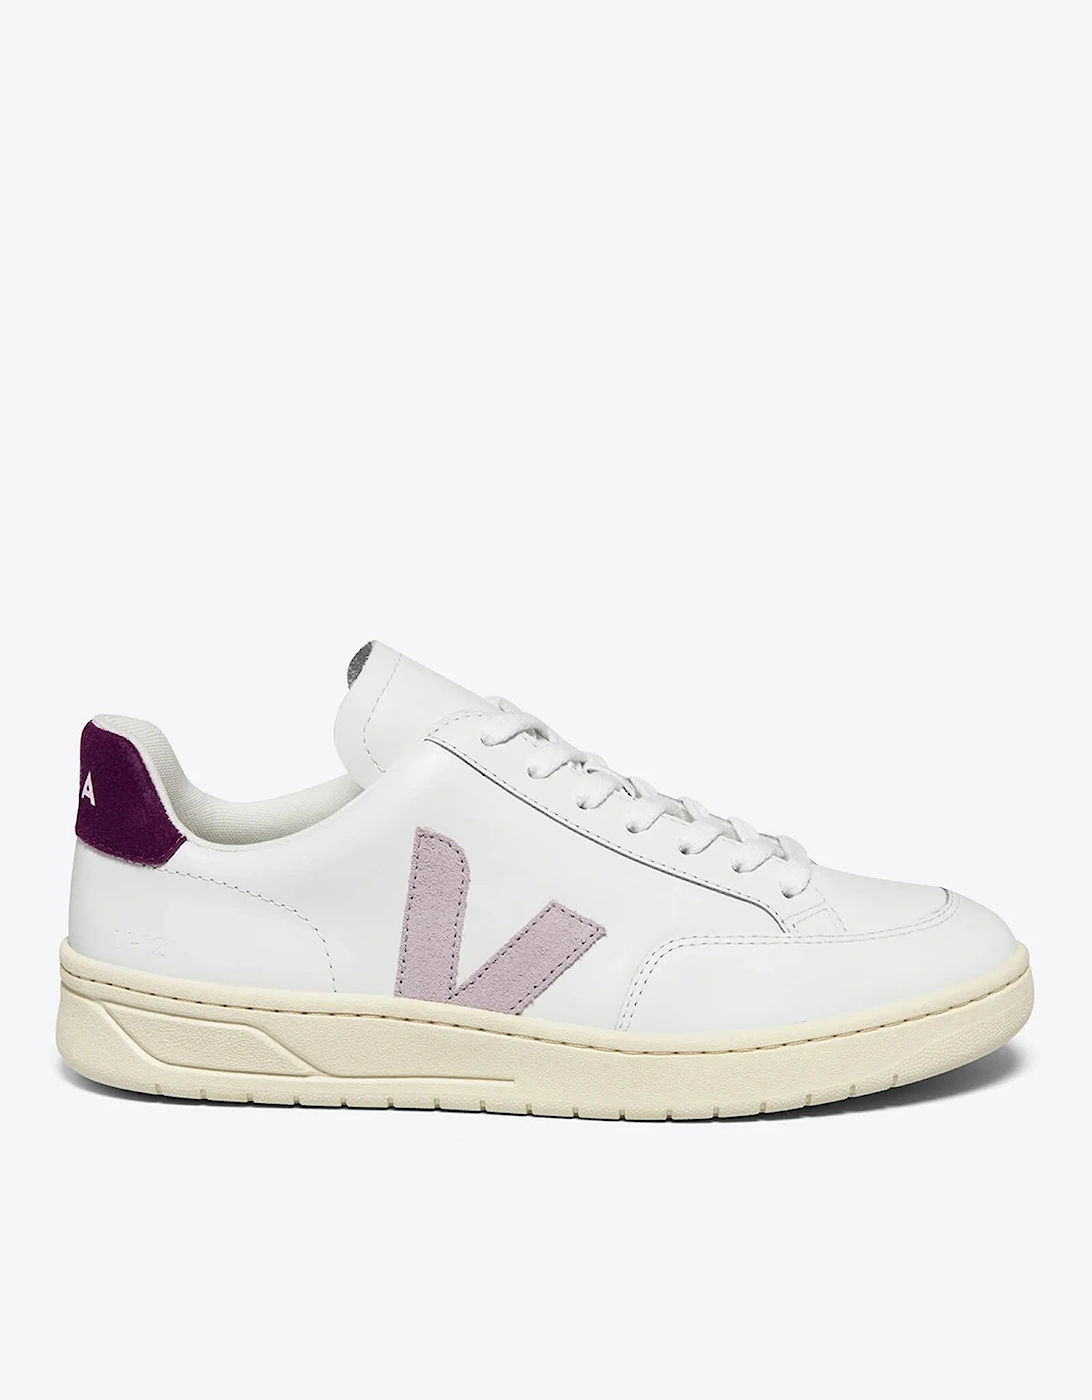 Women's V-12 Leather Trainers - - Home - Women's Shoes - Women's Low Top Trainers - Women's V-12 Leather Trainers, 2 of 1